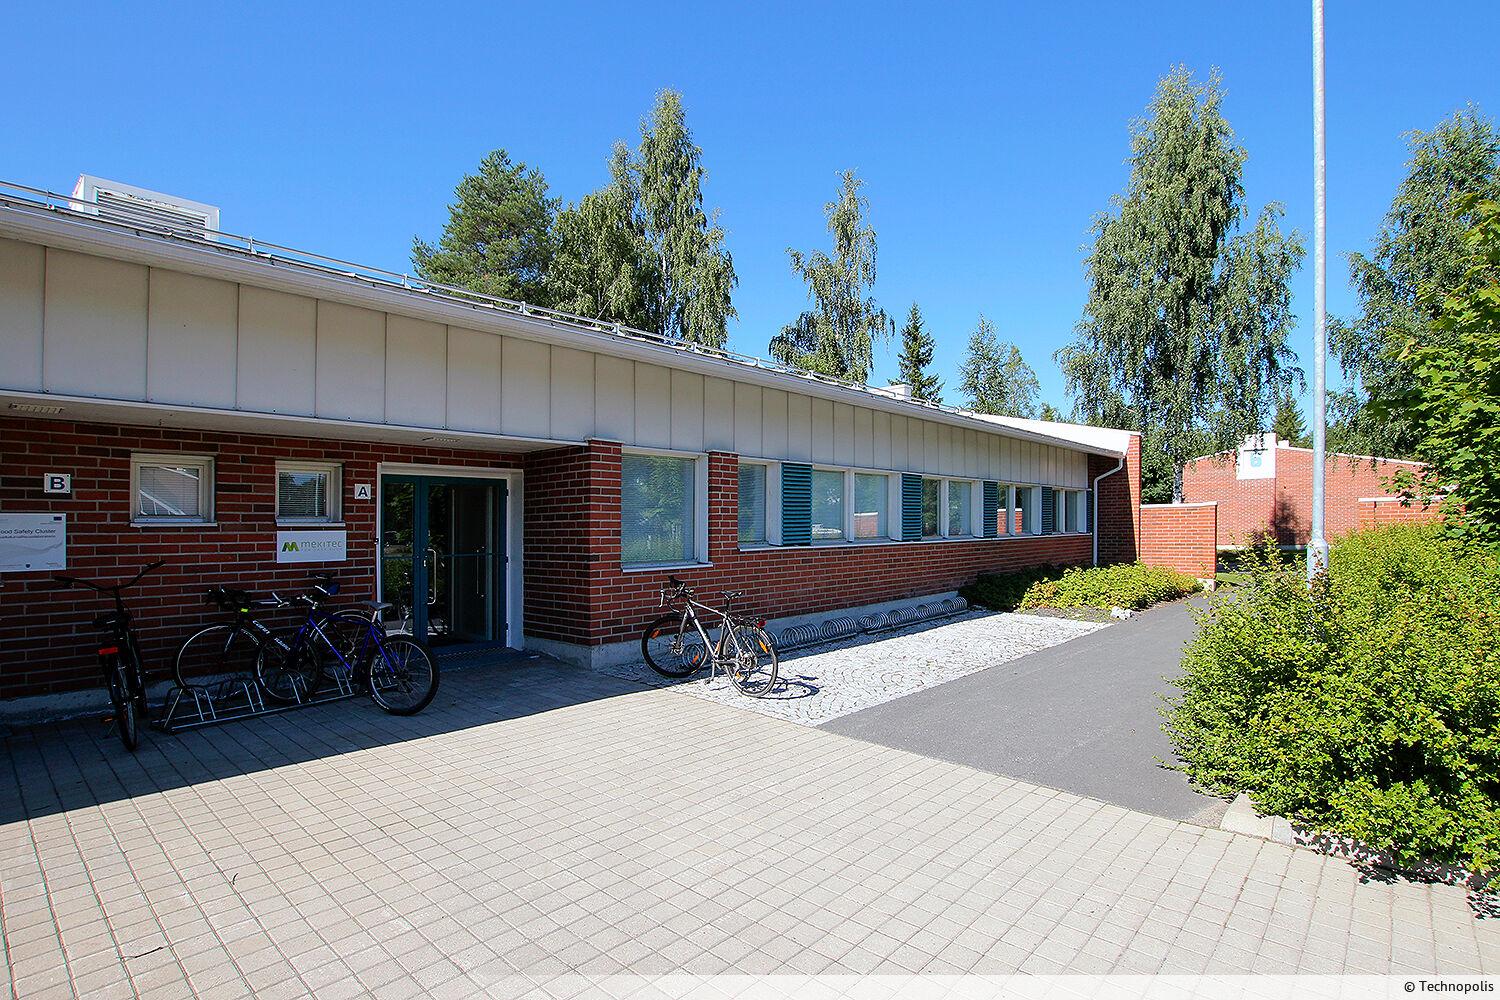 A 1st floor office space for rent at Technopolis Linnanmaa Technology Village. The office space contains of open space and several office rooms.